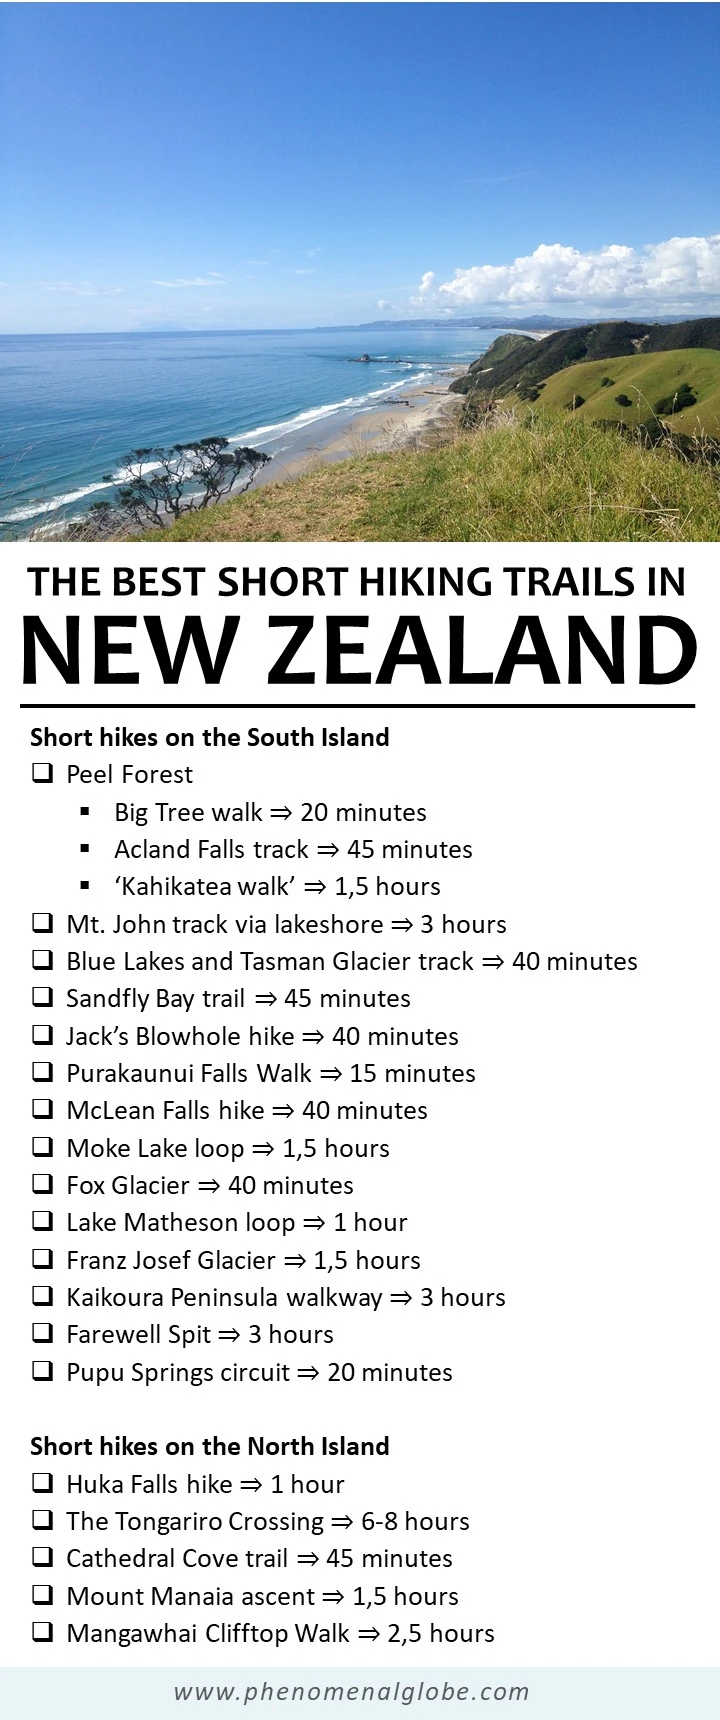 The best short hiking trails in New Zealand on the North and South Island. #NewZealand #Hiking #Tramping